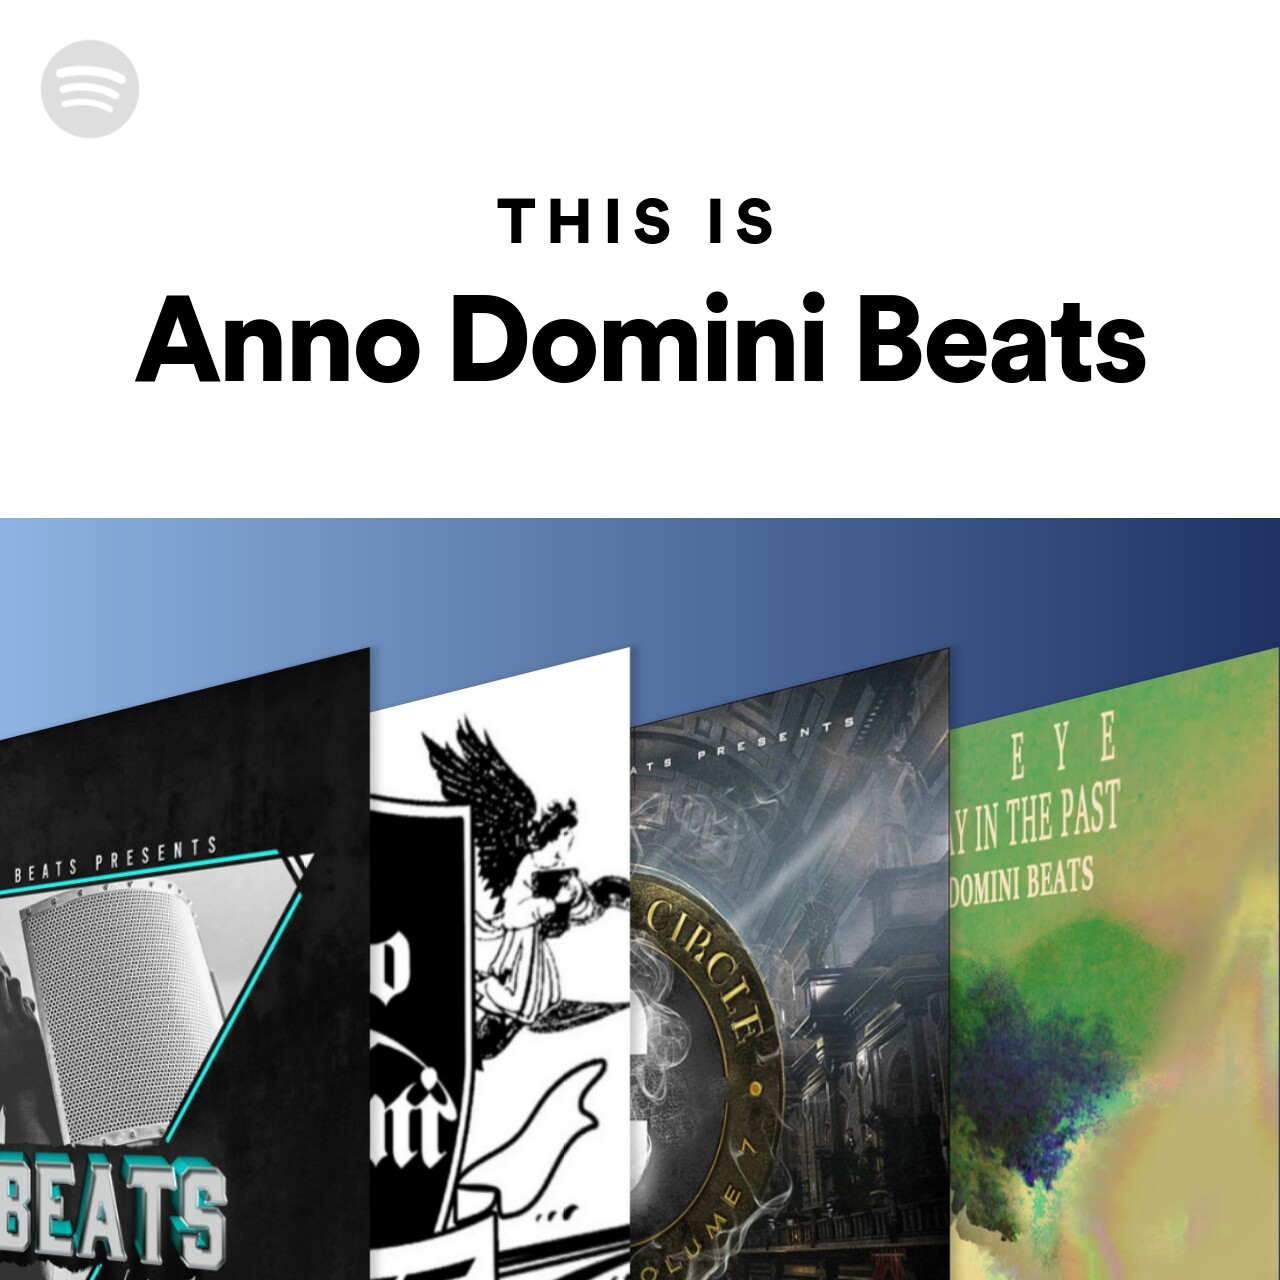 This Is Anno Domini Beats